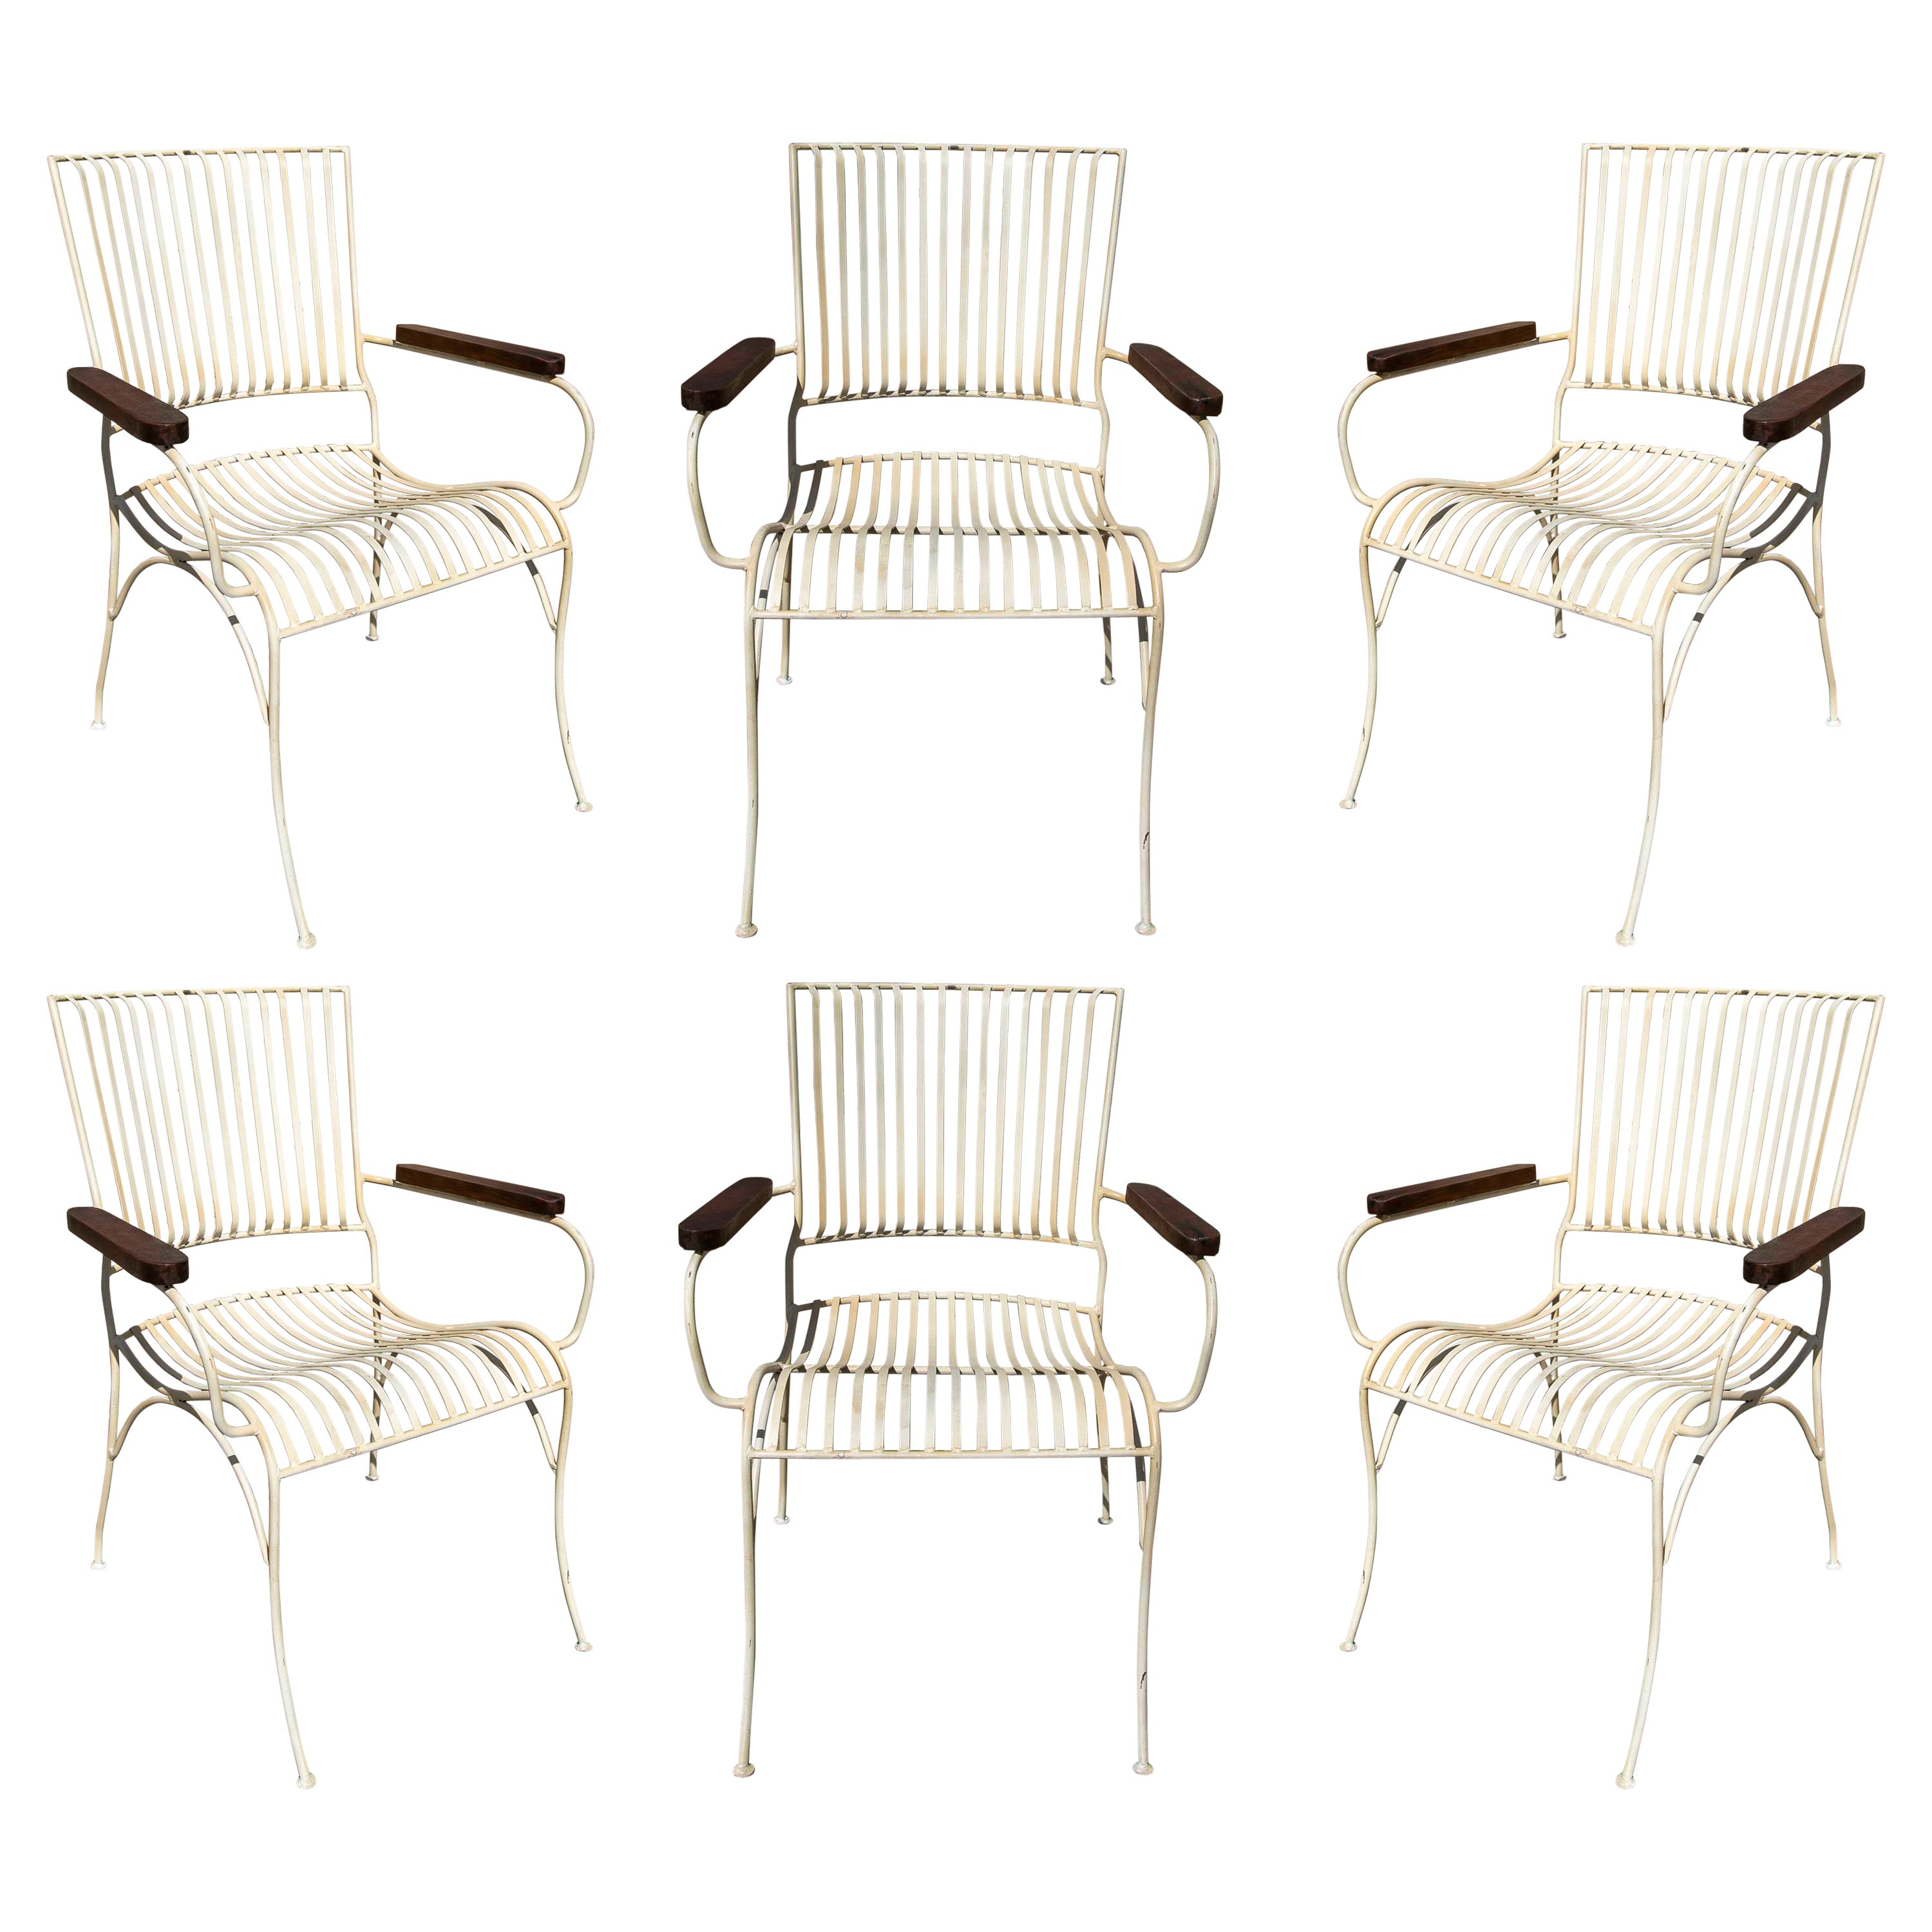 Set of Six Garden Chairs Made of Iron with Wooden Armrests 